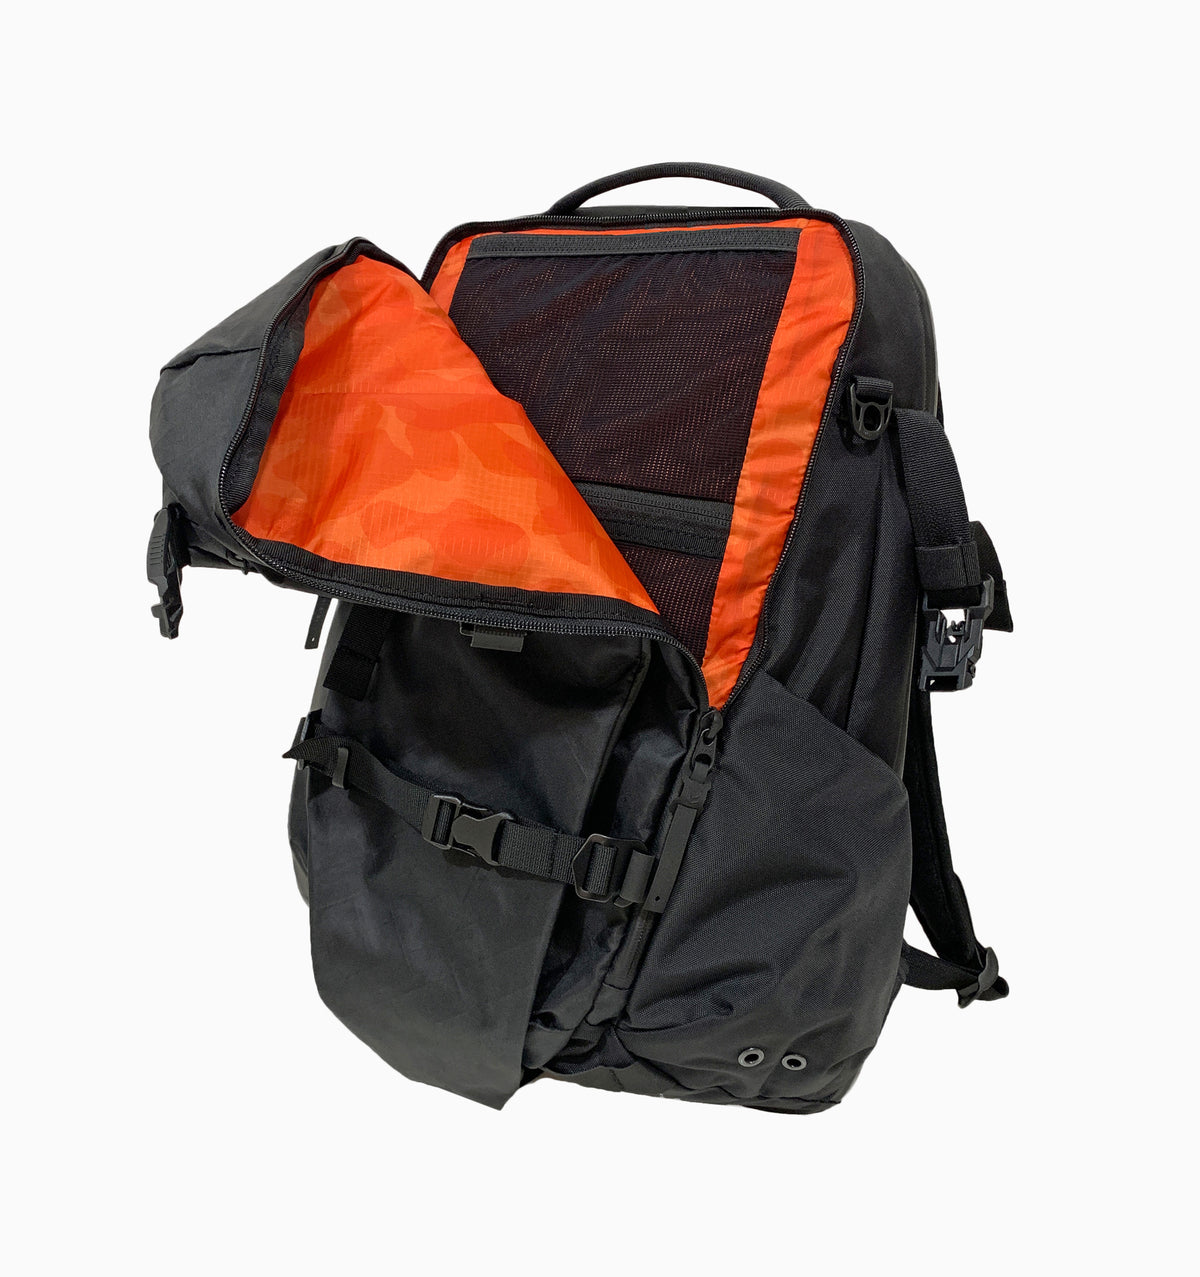 Code of Bell 16" X-Type Backpack 17L - Black